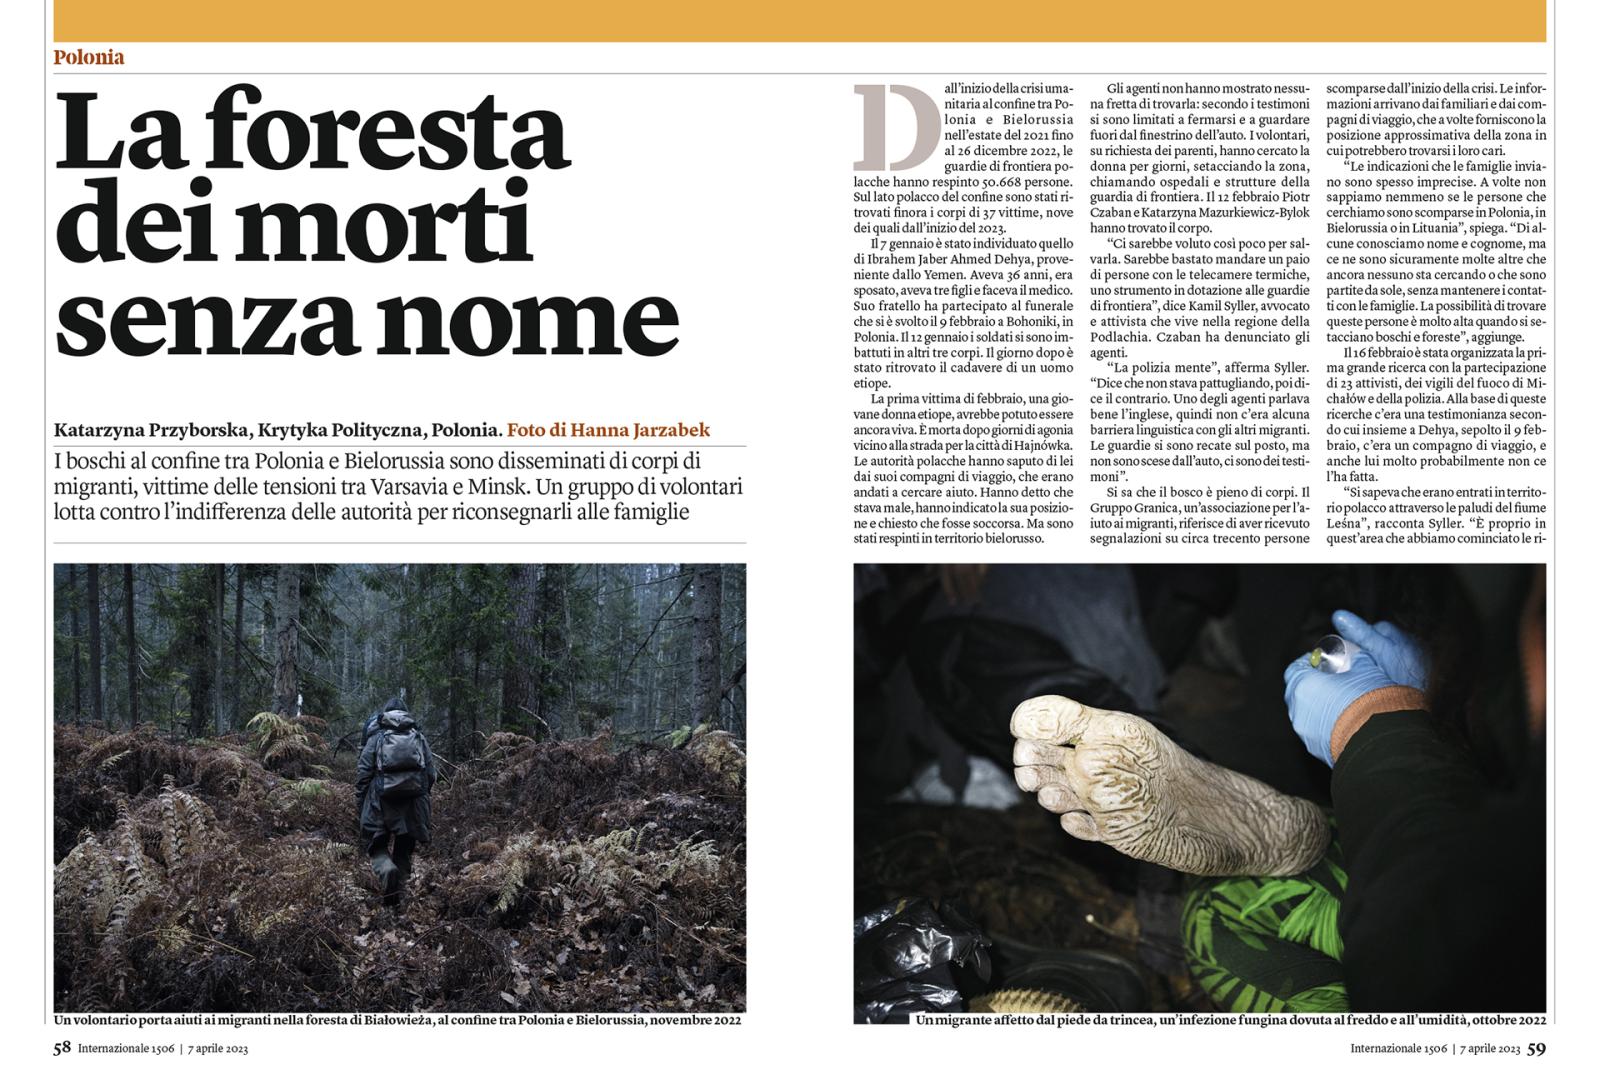 INTERNAZIONALE Magazine - publication about refugees in Bialowieza Forest